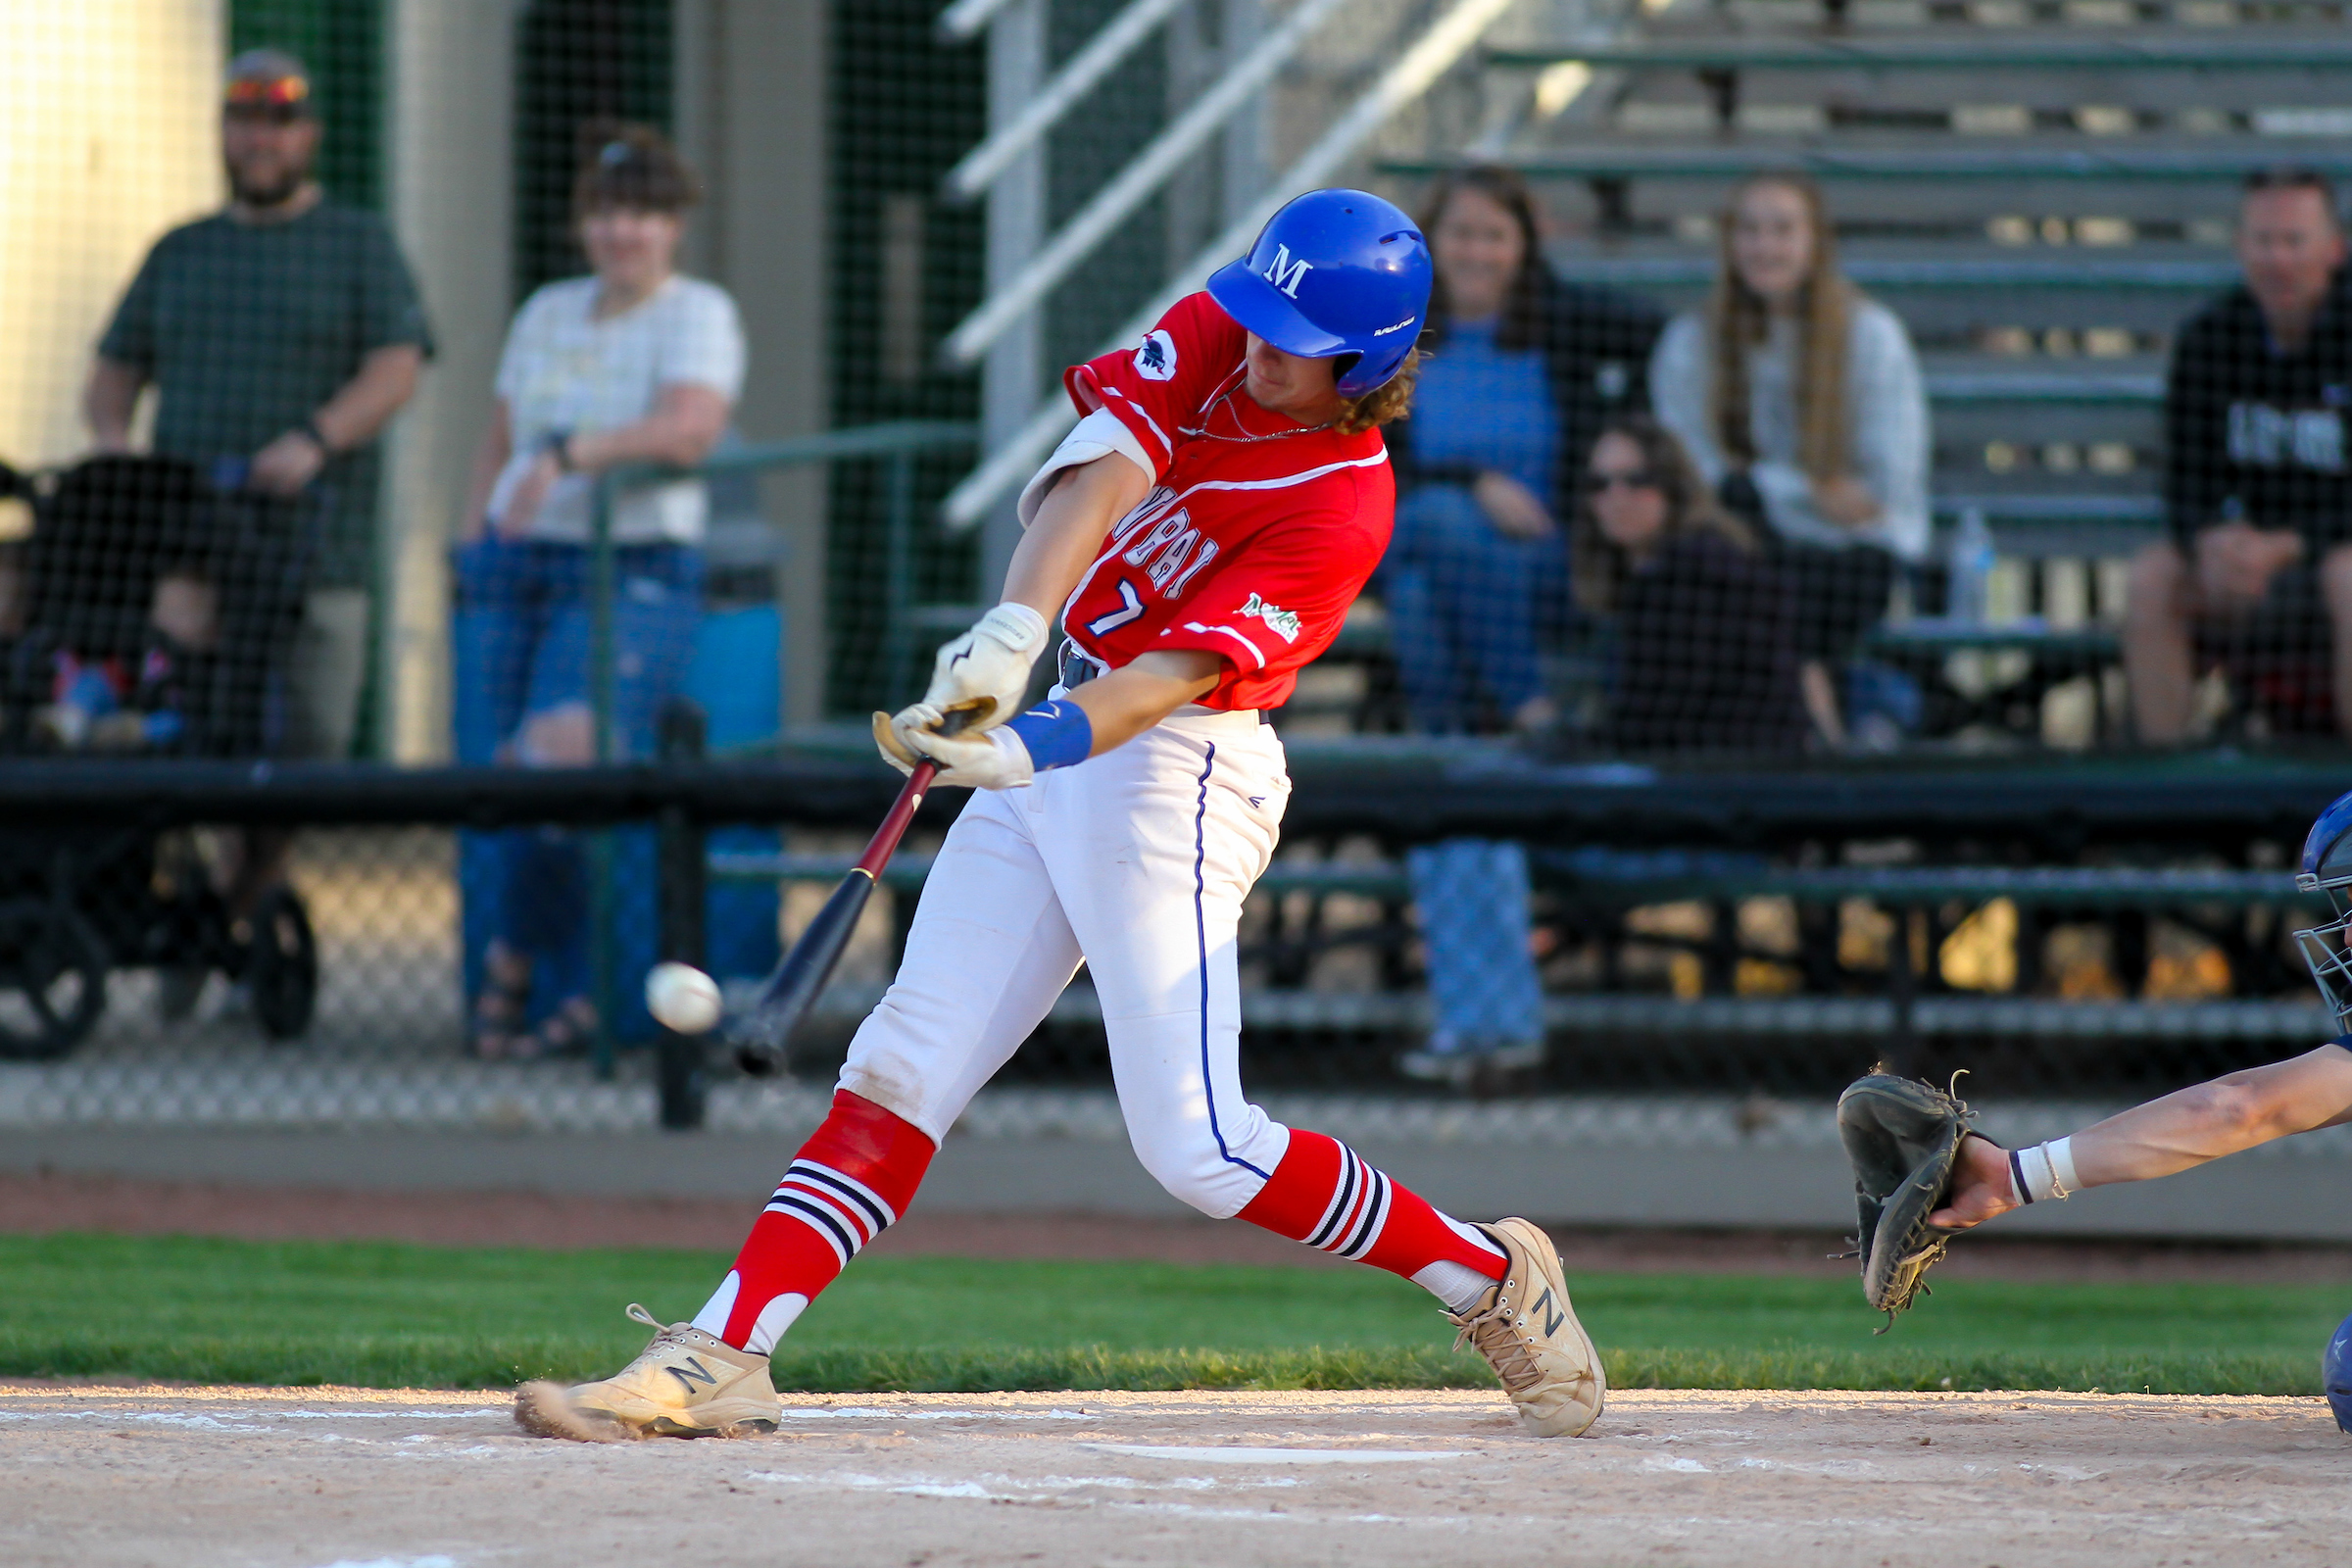 Green Bay Blue Ribbons third baseman James Bornick (7) during their red vs. blue scrimmage game on May 26, 2023 at Joannes Stadium in Green Bay, Wisconsin. (Brad Krause/Krause Sports Photography)